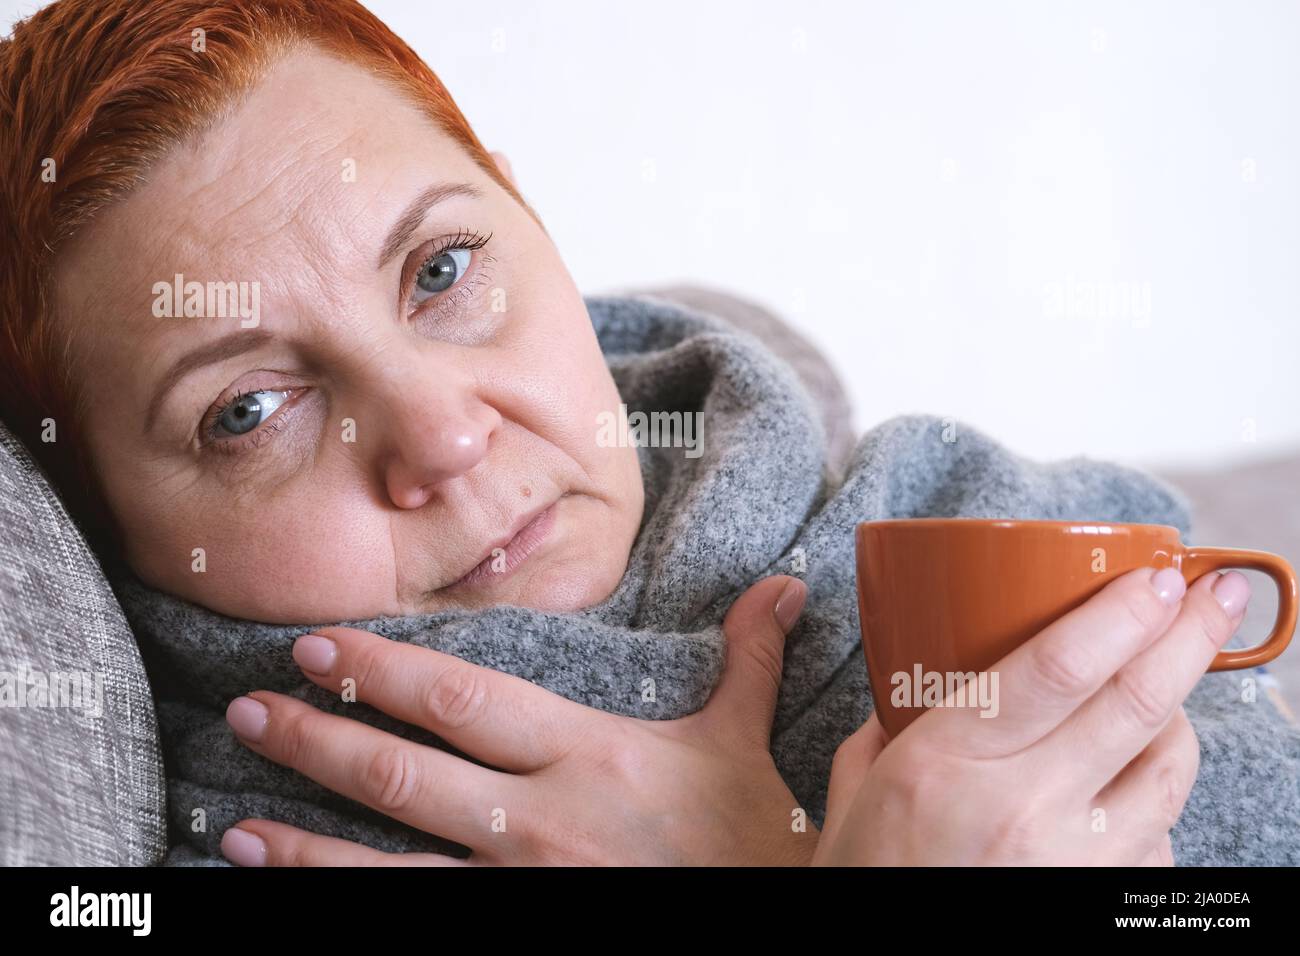 A young woman with a cold or flu-like illness. Portrait of an unhealthy girl with a scarf around her neck to warm a sore throat, drinking tea. Colds a Stock Photo